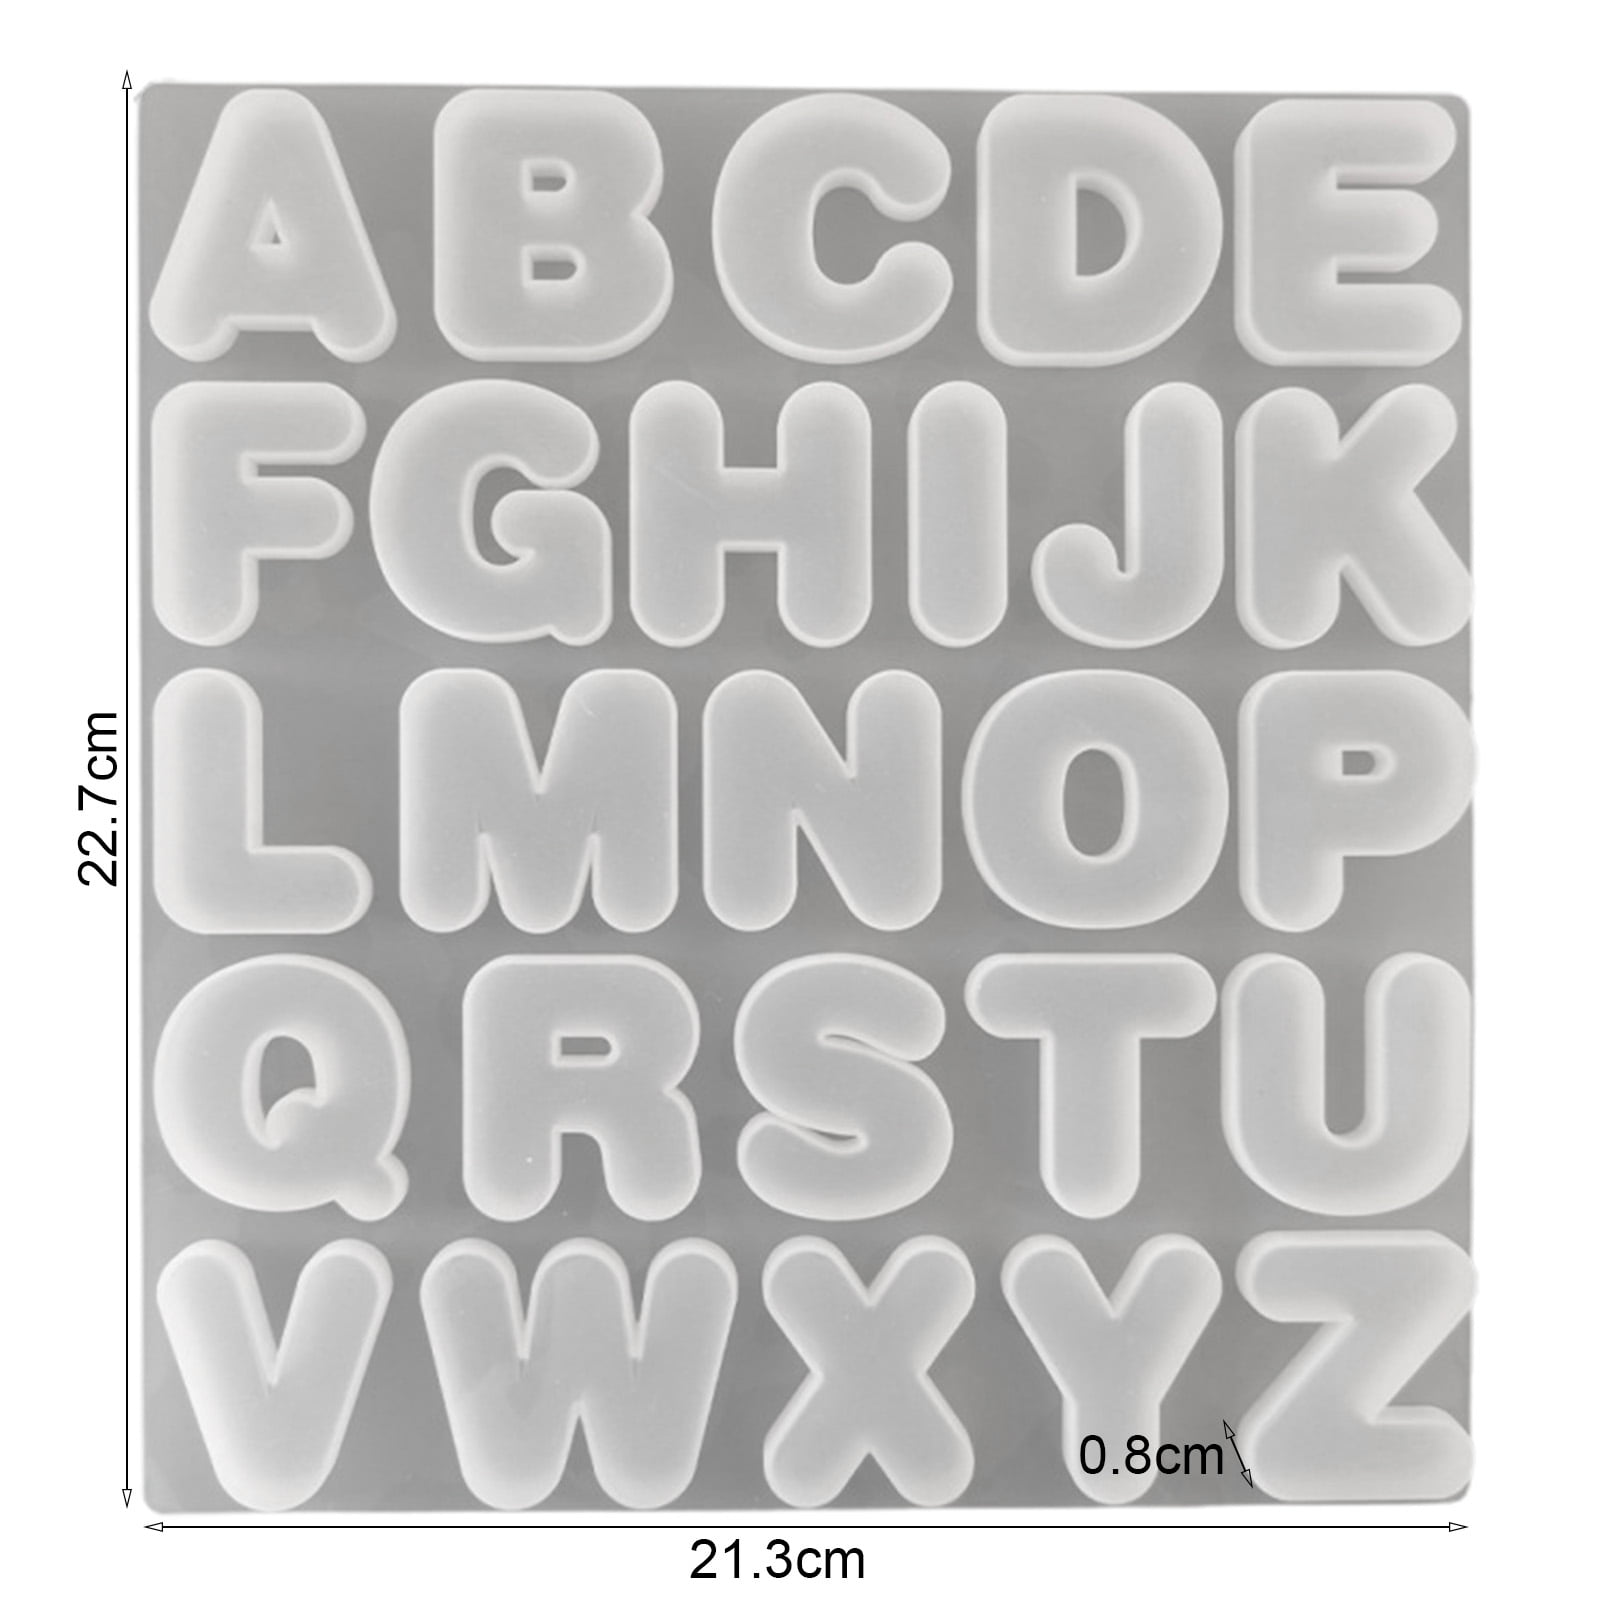 Hycsc Silicone Letter Molds - Letter Molds for Chocolate, Food Grade Cake Letter Mold, Non-Stick Silicone Alphabet Mold, Silicone Fondant Mold for